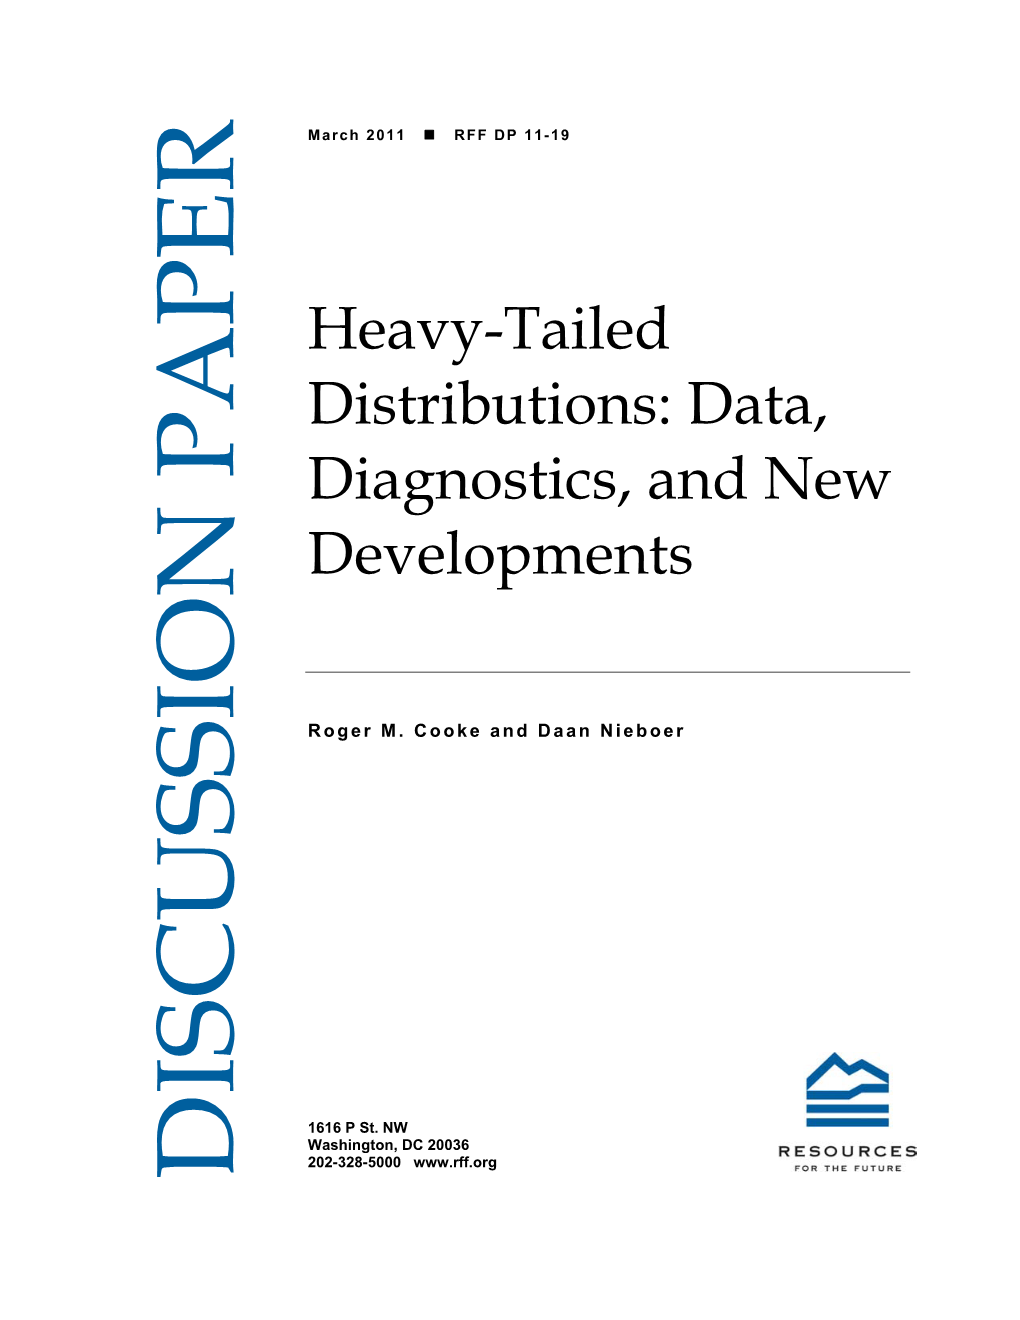 Heavy-Tailed Distributions: Data, Diagnostics, and New Developments